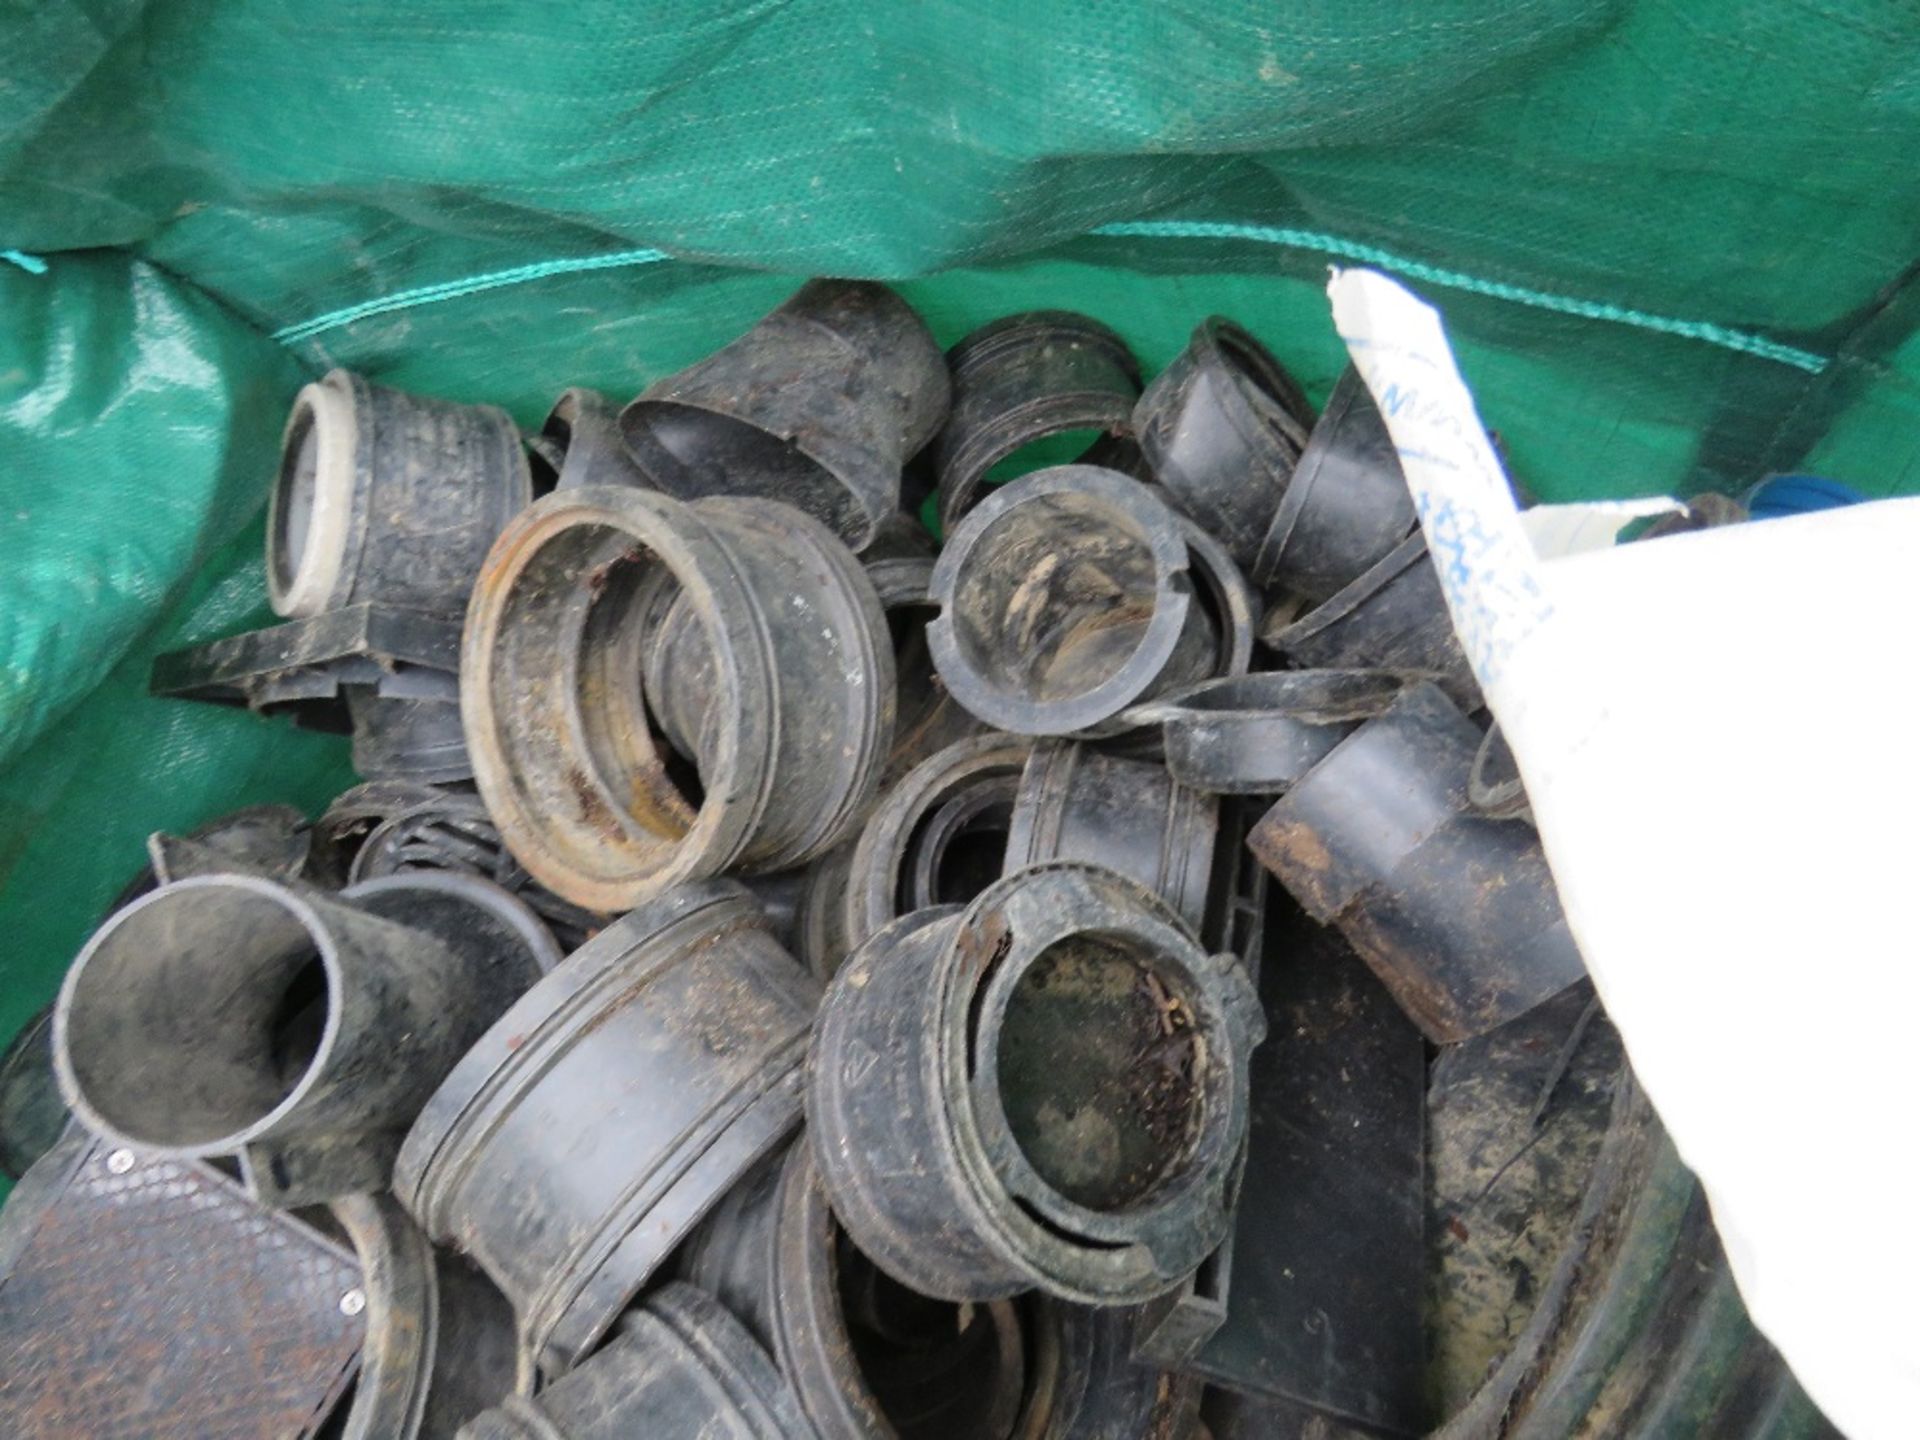 4 X BULK BAGS OF ASSORTED PIPE FITTINGS, MAINLY UNDERGROUND/SOIL TYPE. SOLD UNDER THE AUCTIONEERS MA - Image 7 of 7